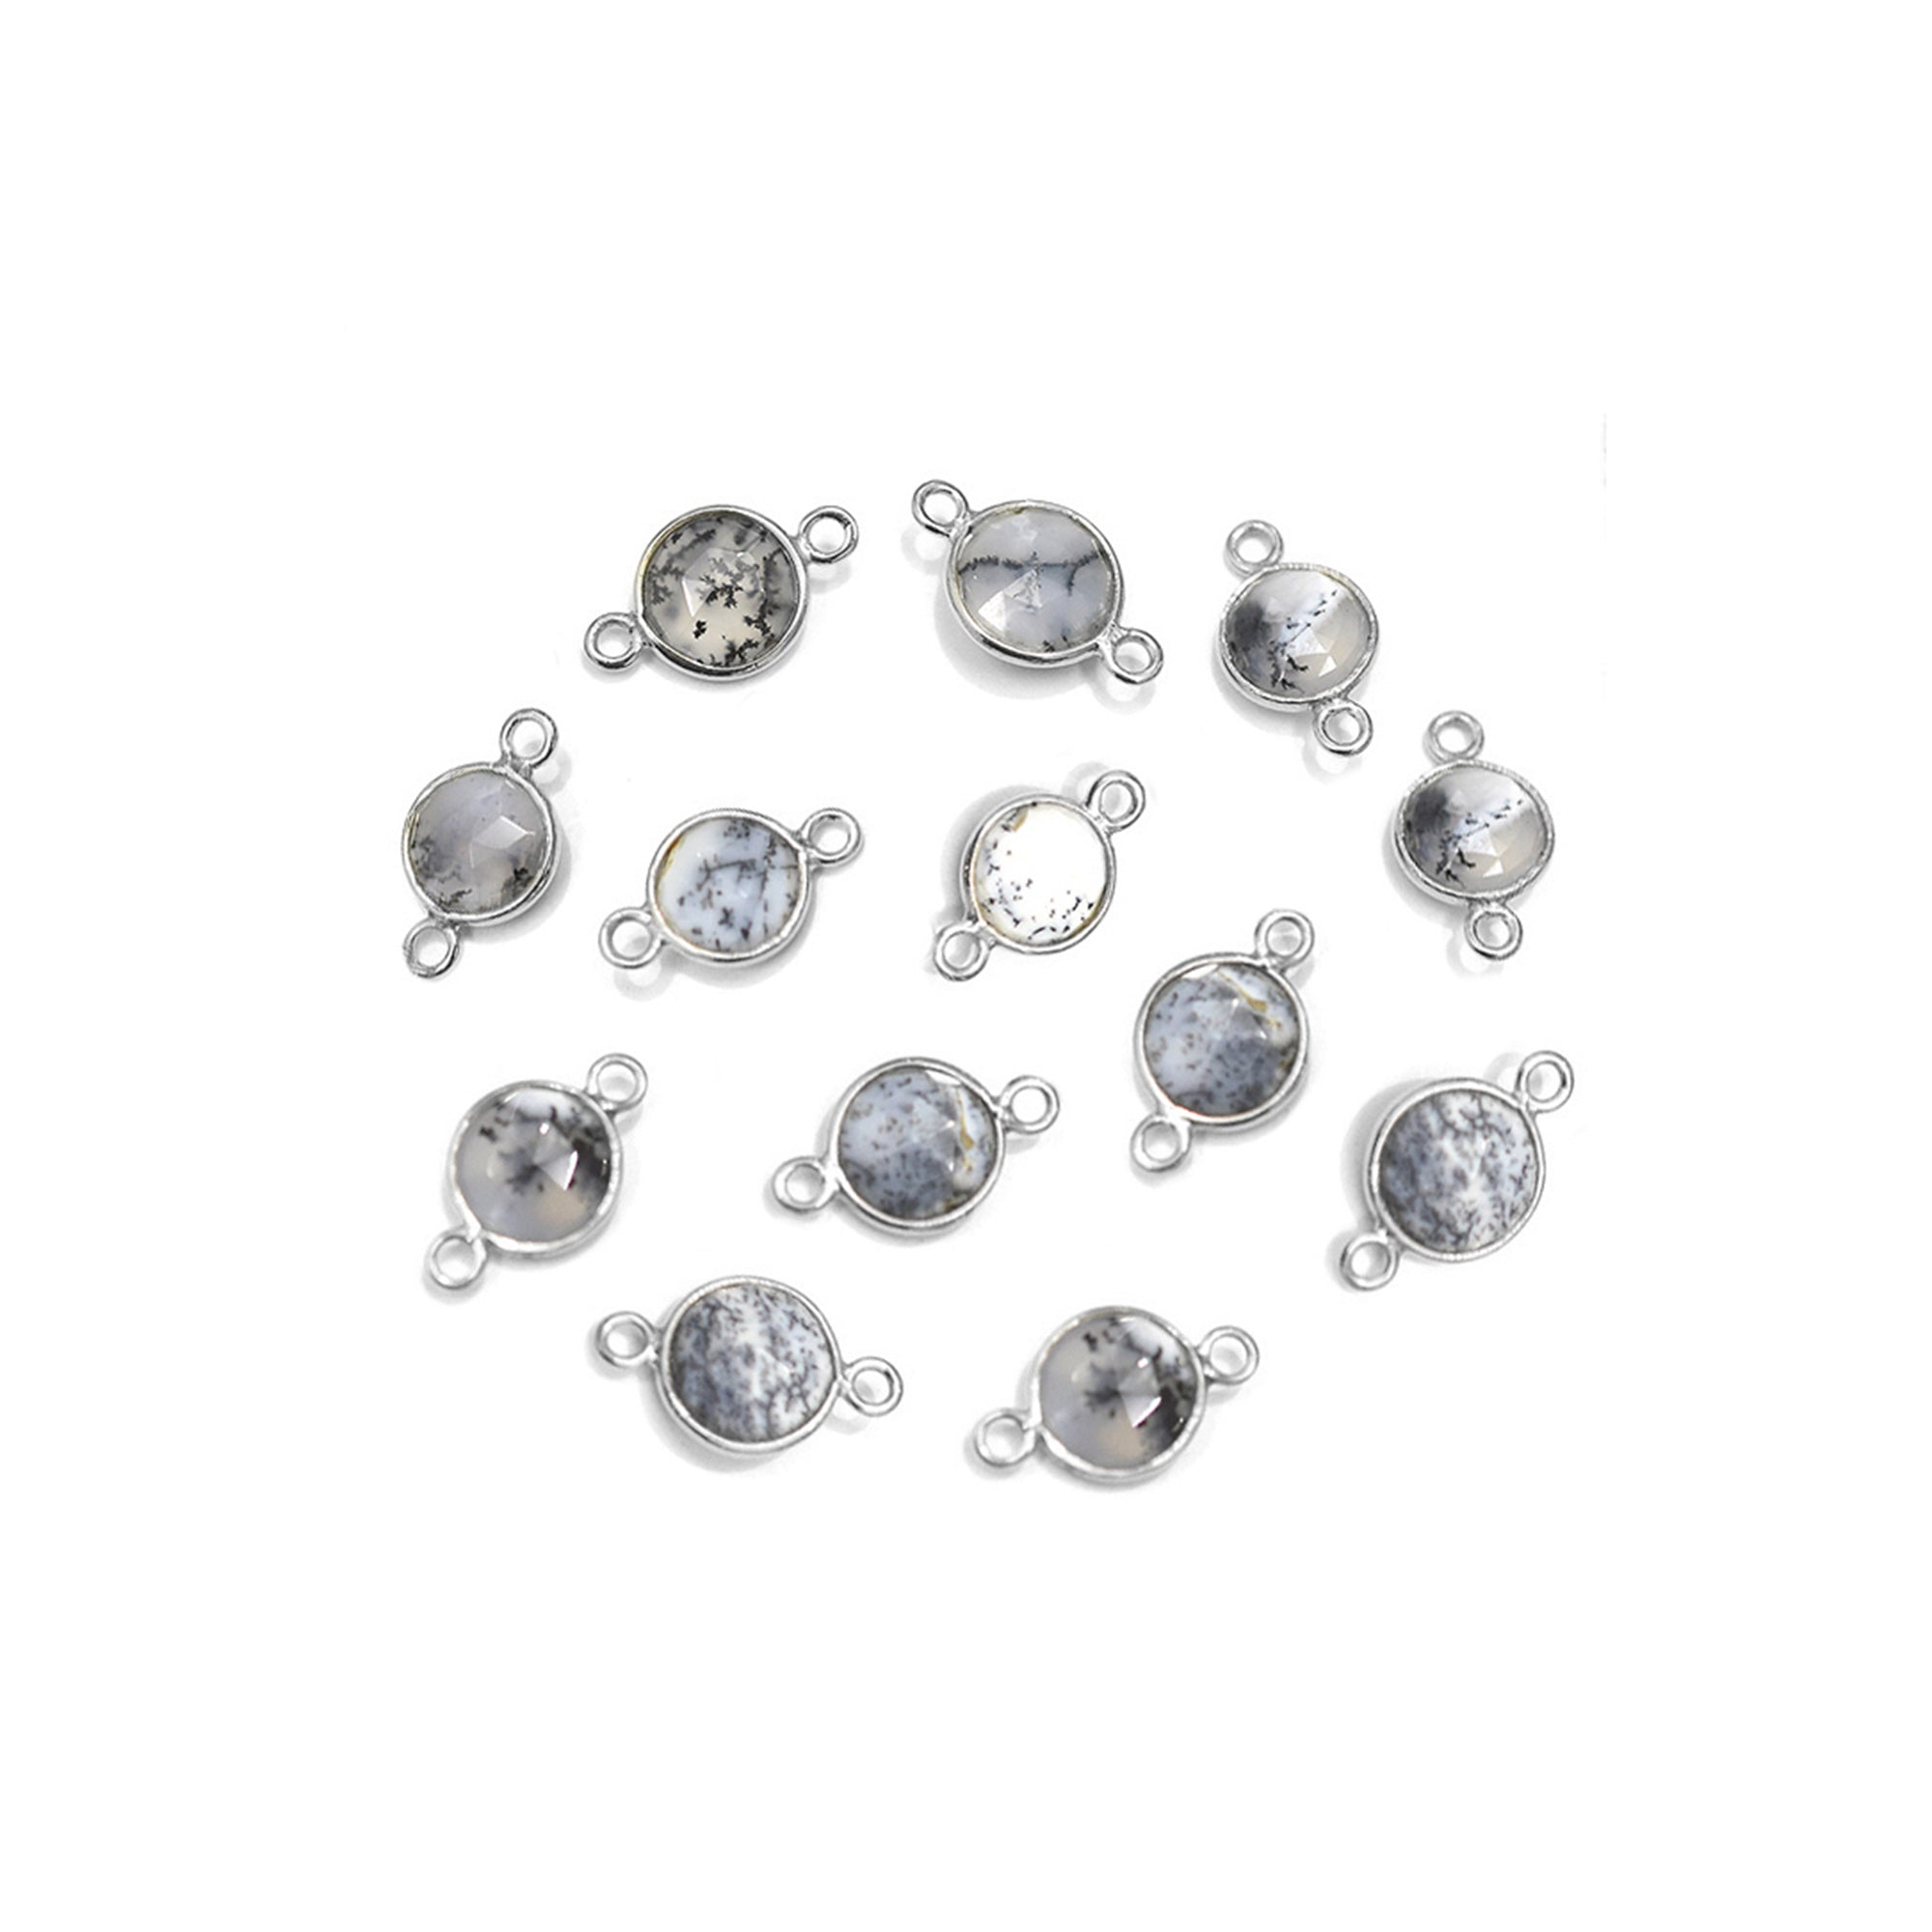 Dendritic Opal 8 MM Round Shape Silver Bezel Rhodium Plated Connector (Set Of 2 Pcs)